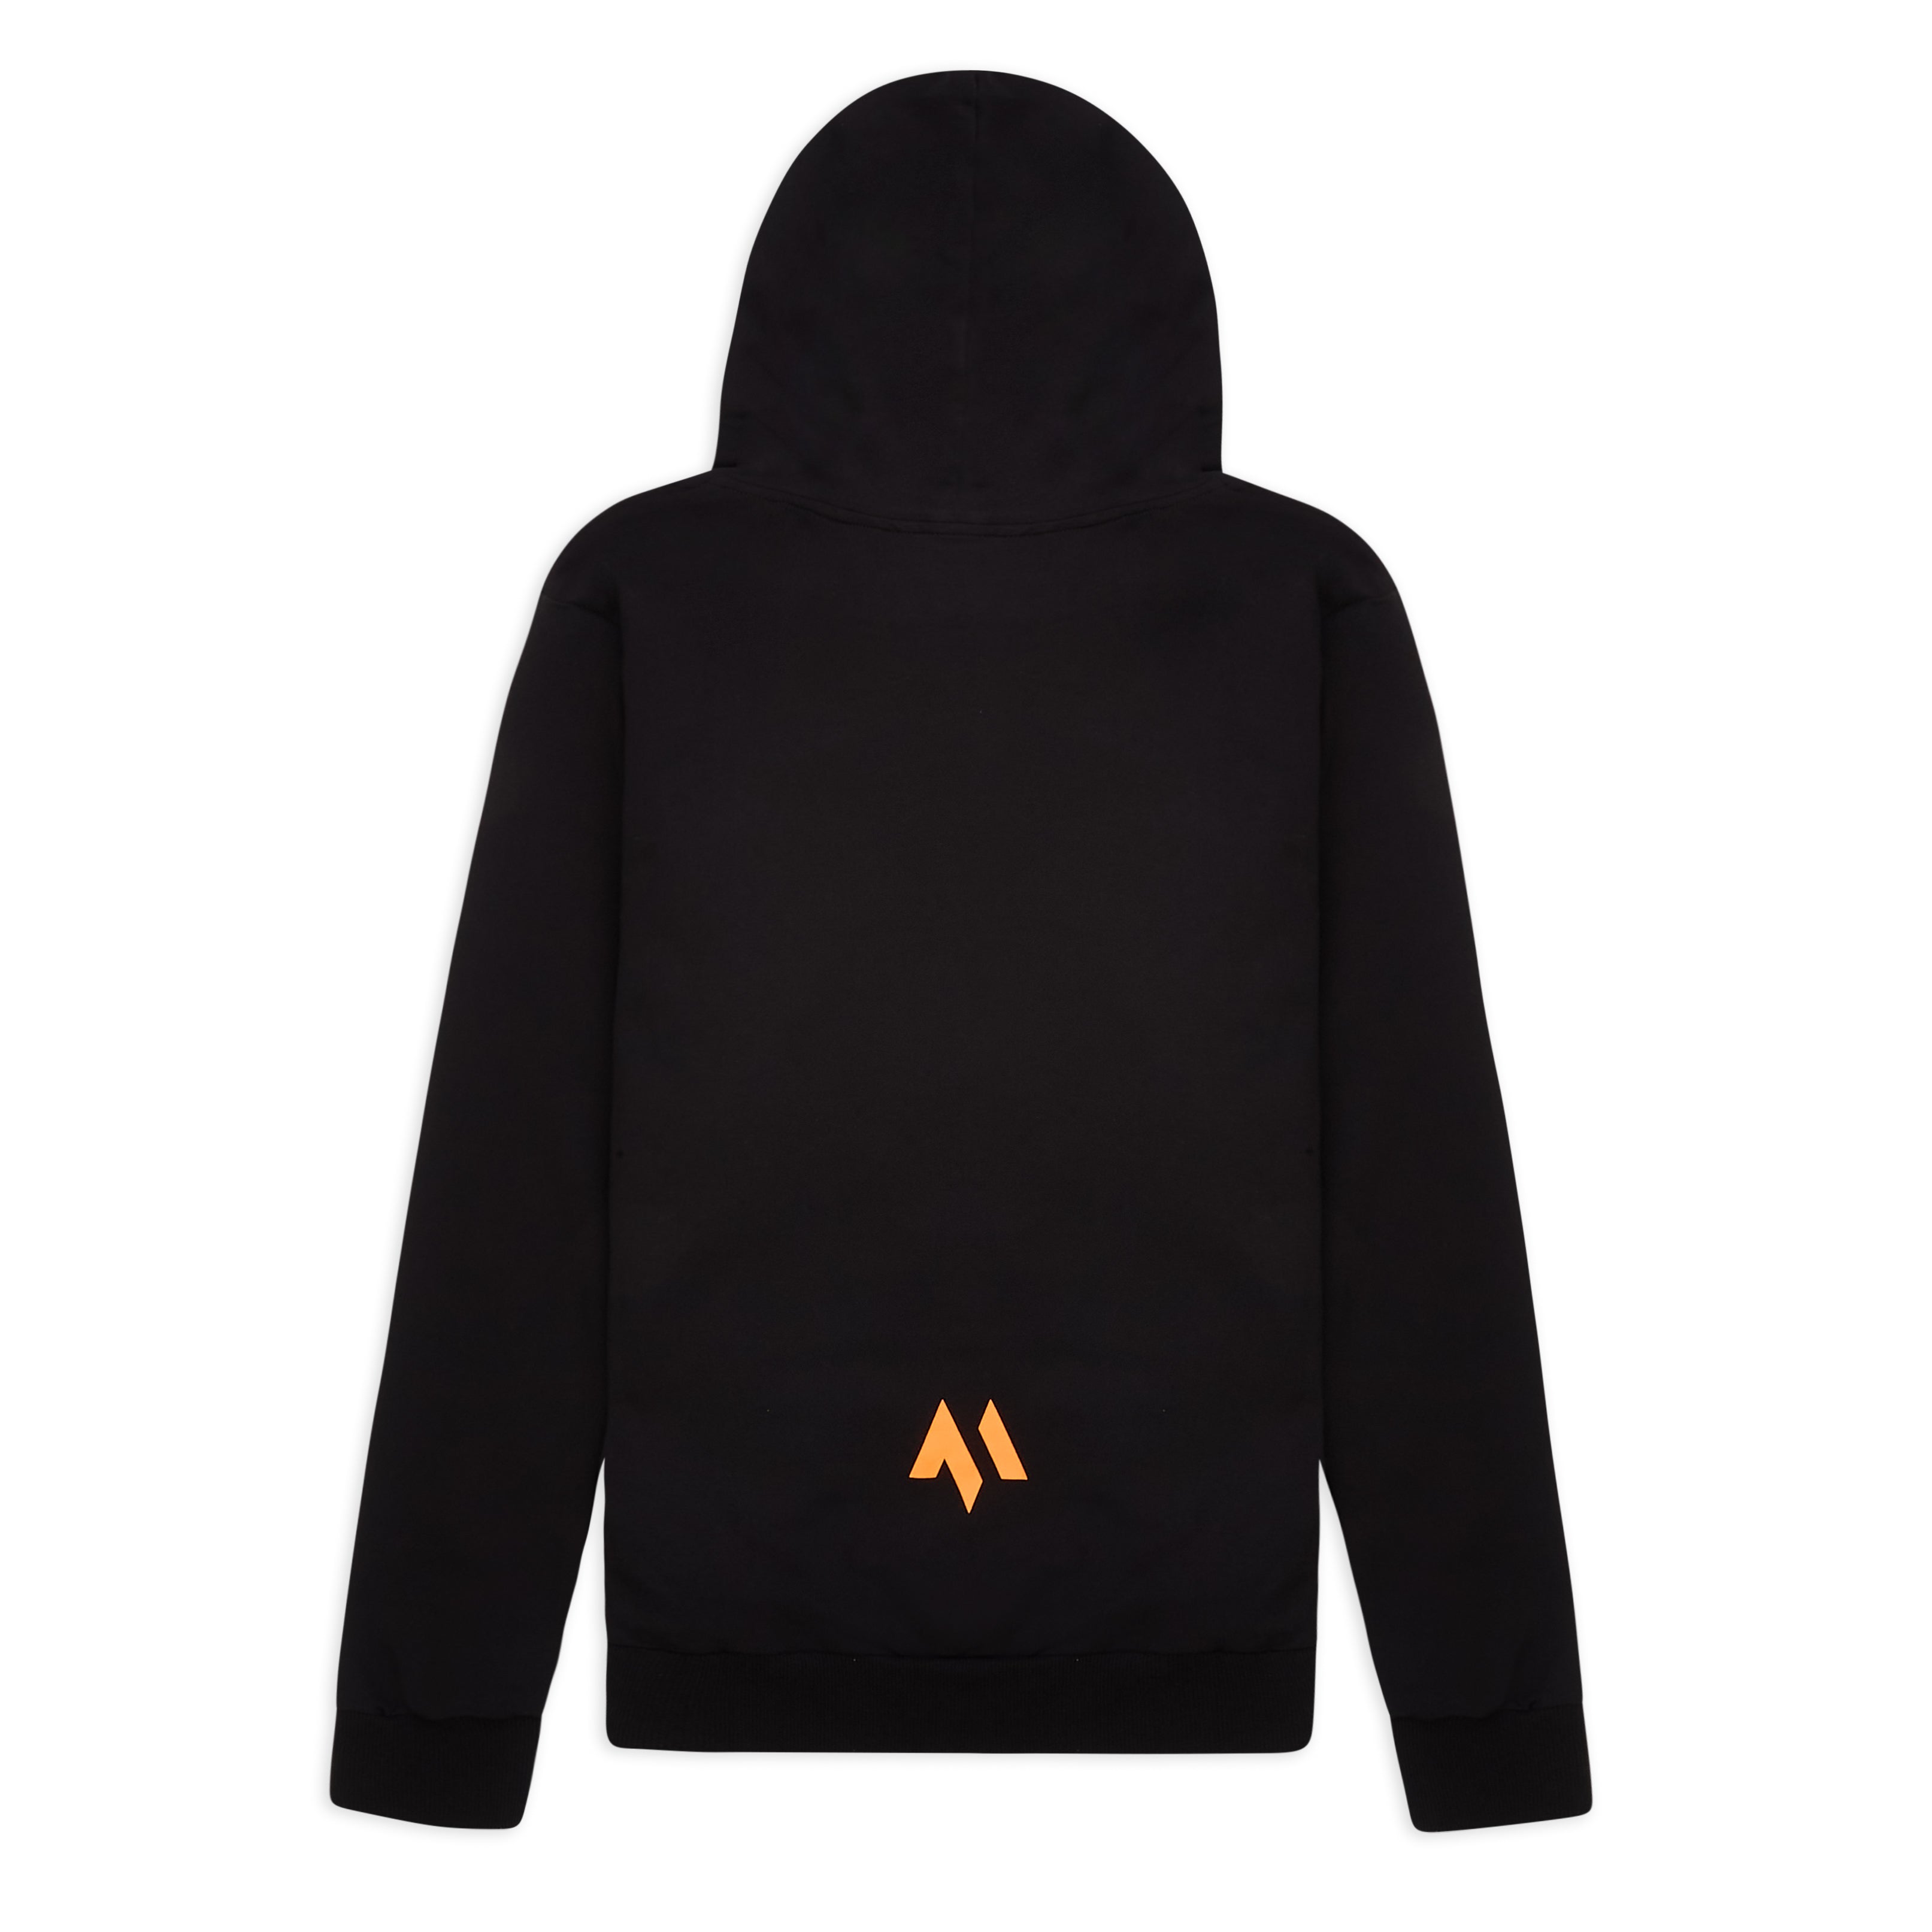 This is the back of the new standard hoodie in black.  It's a large shot of the product on a white background and features the M logo in orange at the bottom of the back